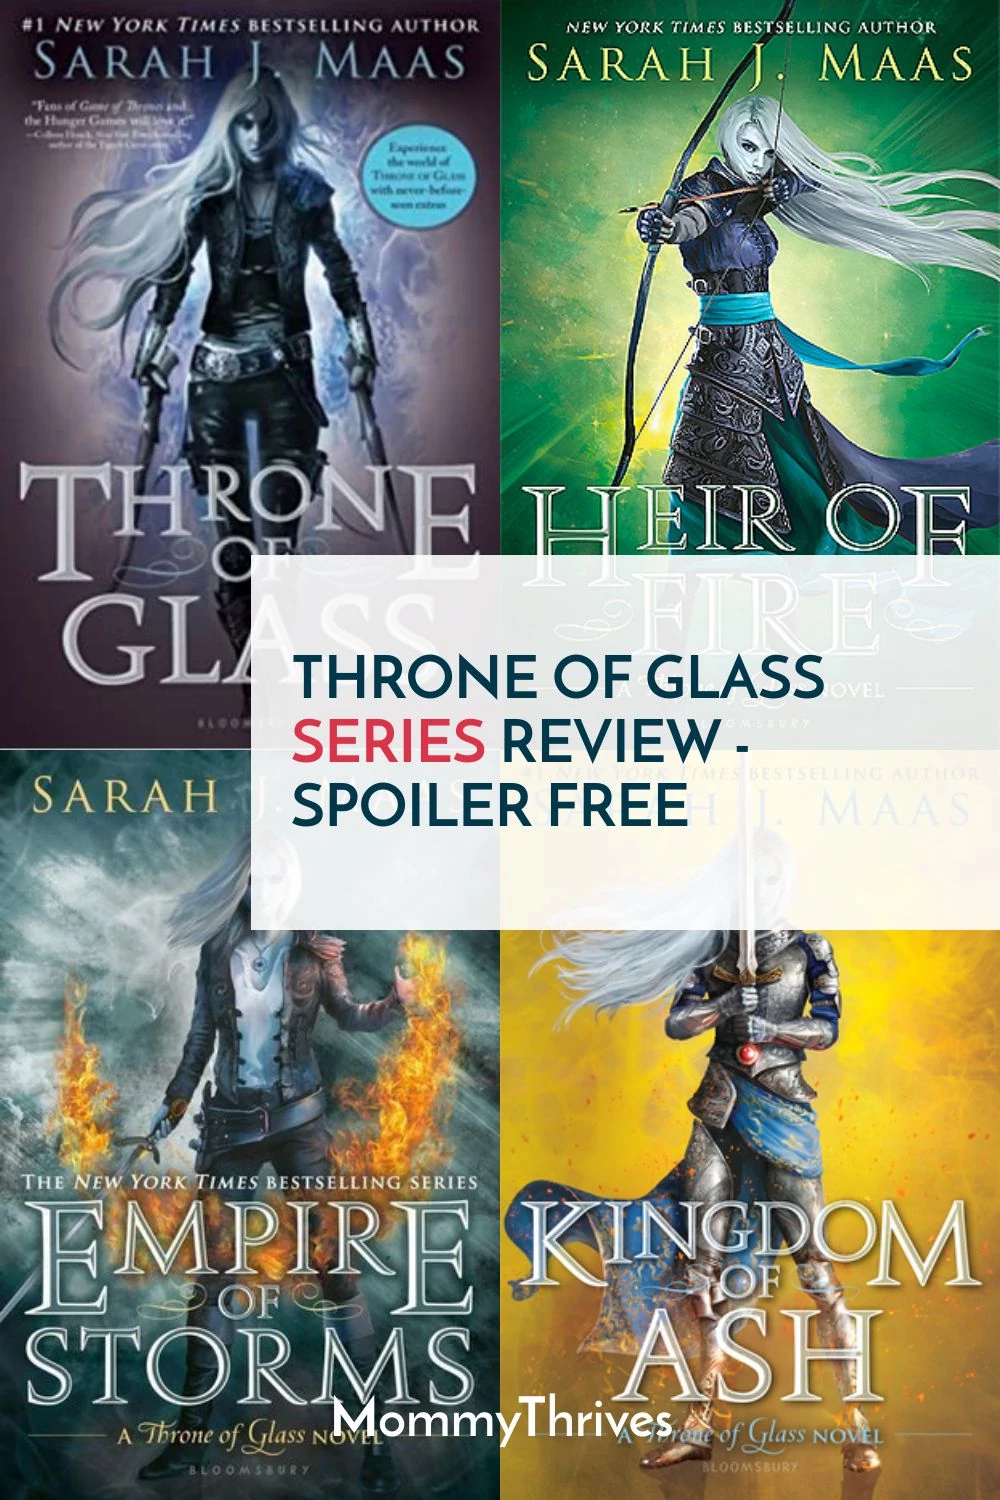 Tower of Dawn (Throne of Glass Book 6) See more